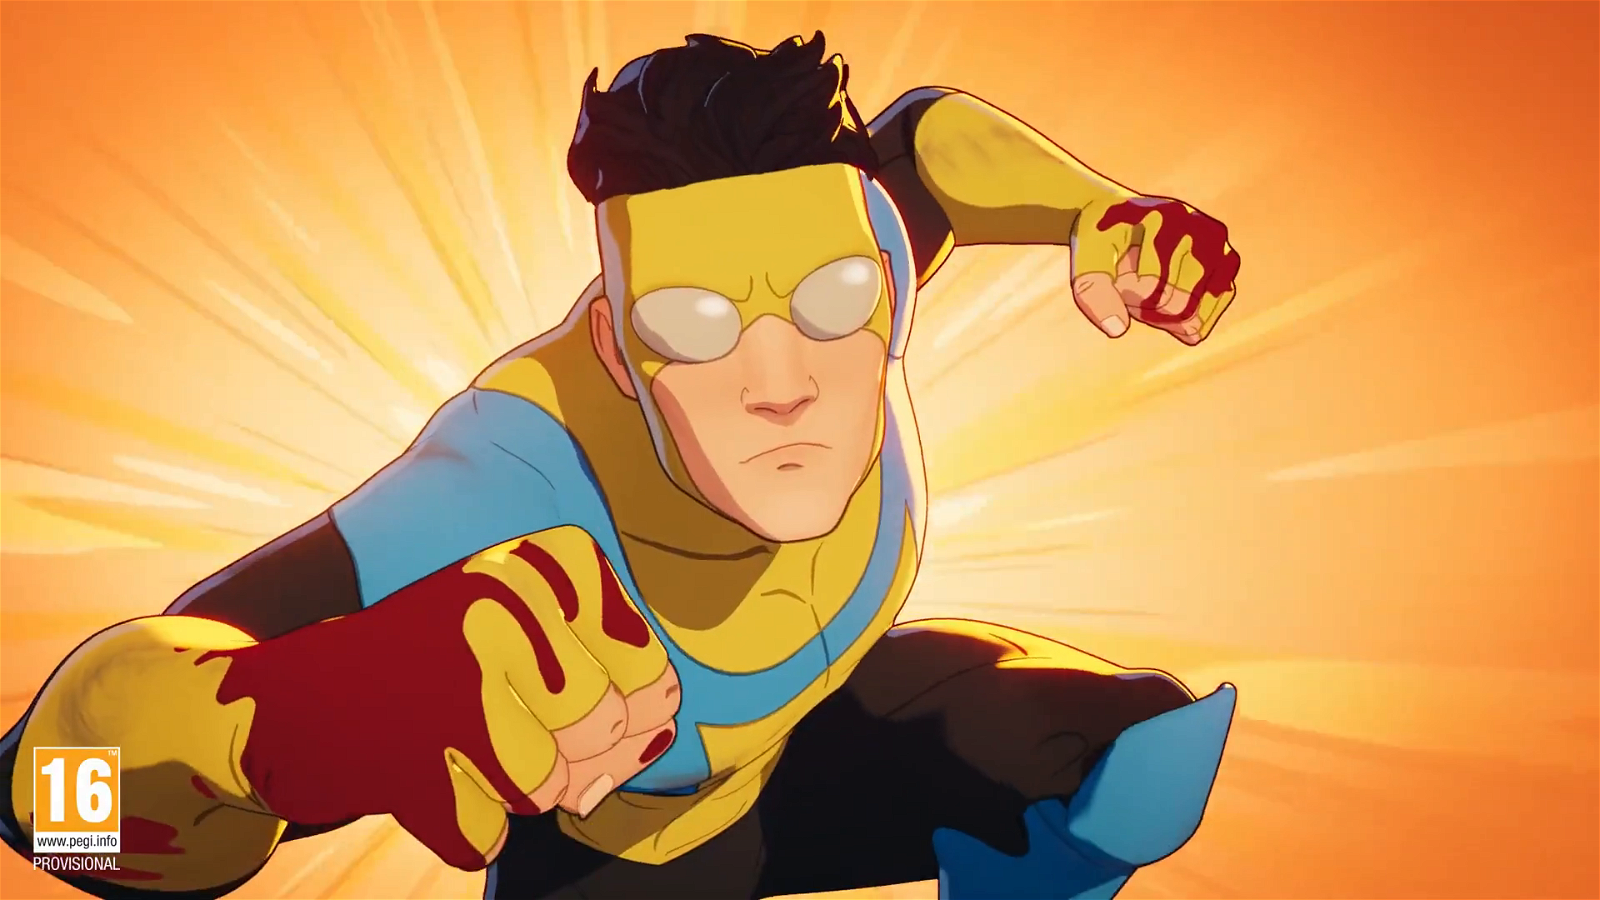 Invincible: Ubisoft to Adapt the Comics Series into a Free-to-Play